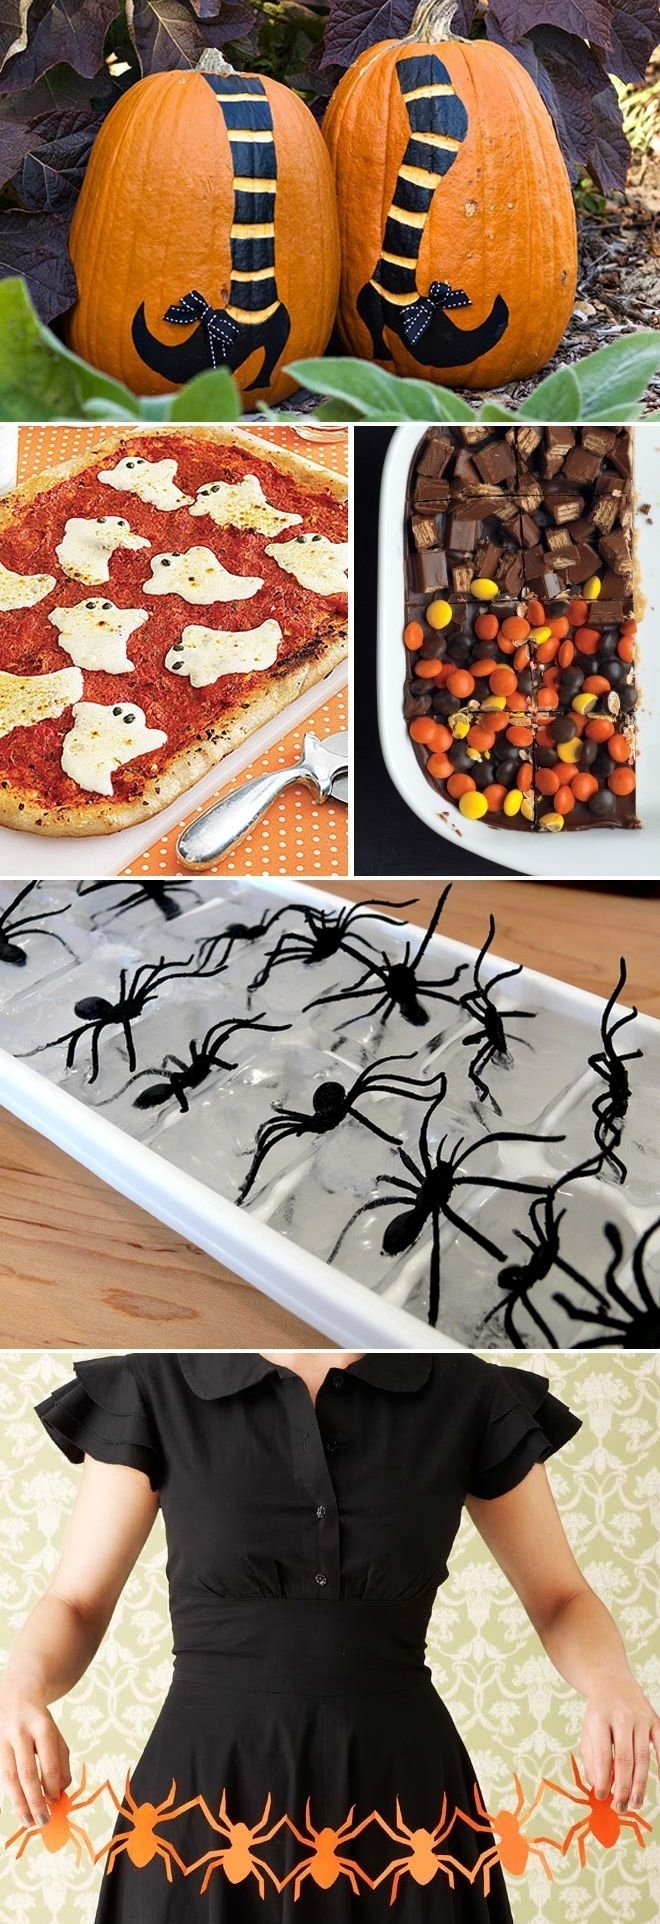 10 Elegant Ideas For What To Be For Halloween 629 best halloween party ideas images on pinterest halloween prop 4 2022